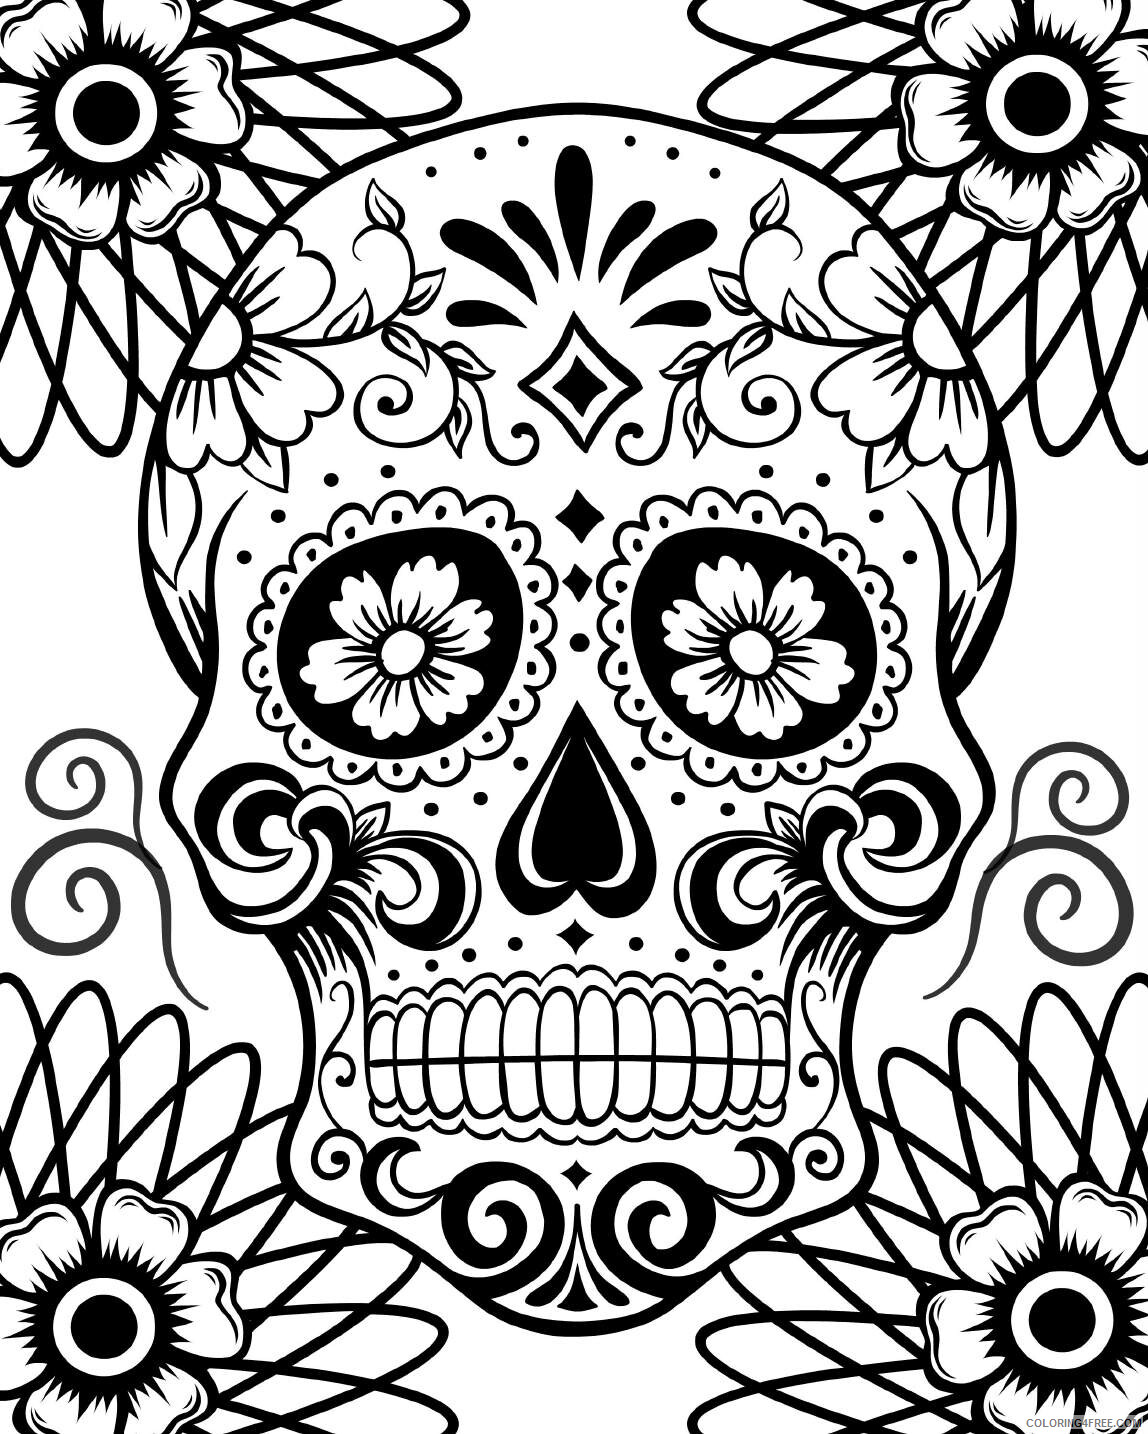 Skull Coloring Pages skulls for day of the dead Printable 2021 5457 Coloring4free